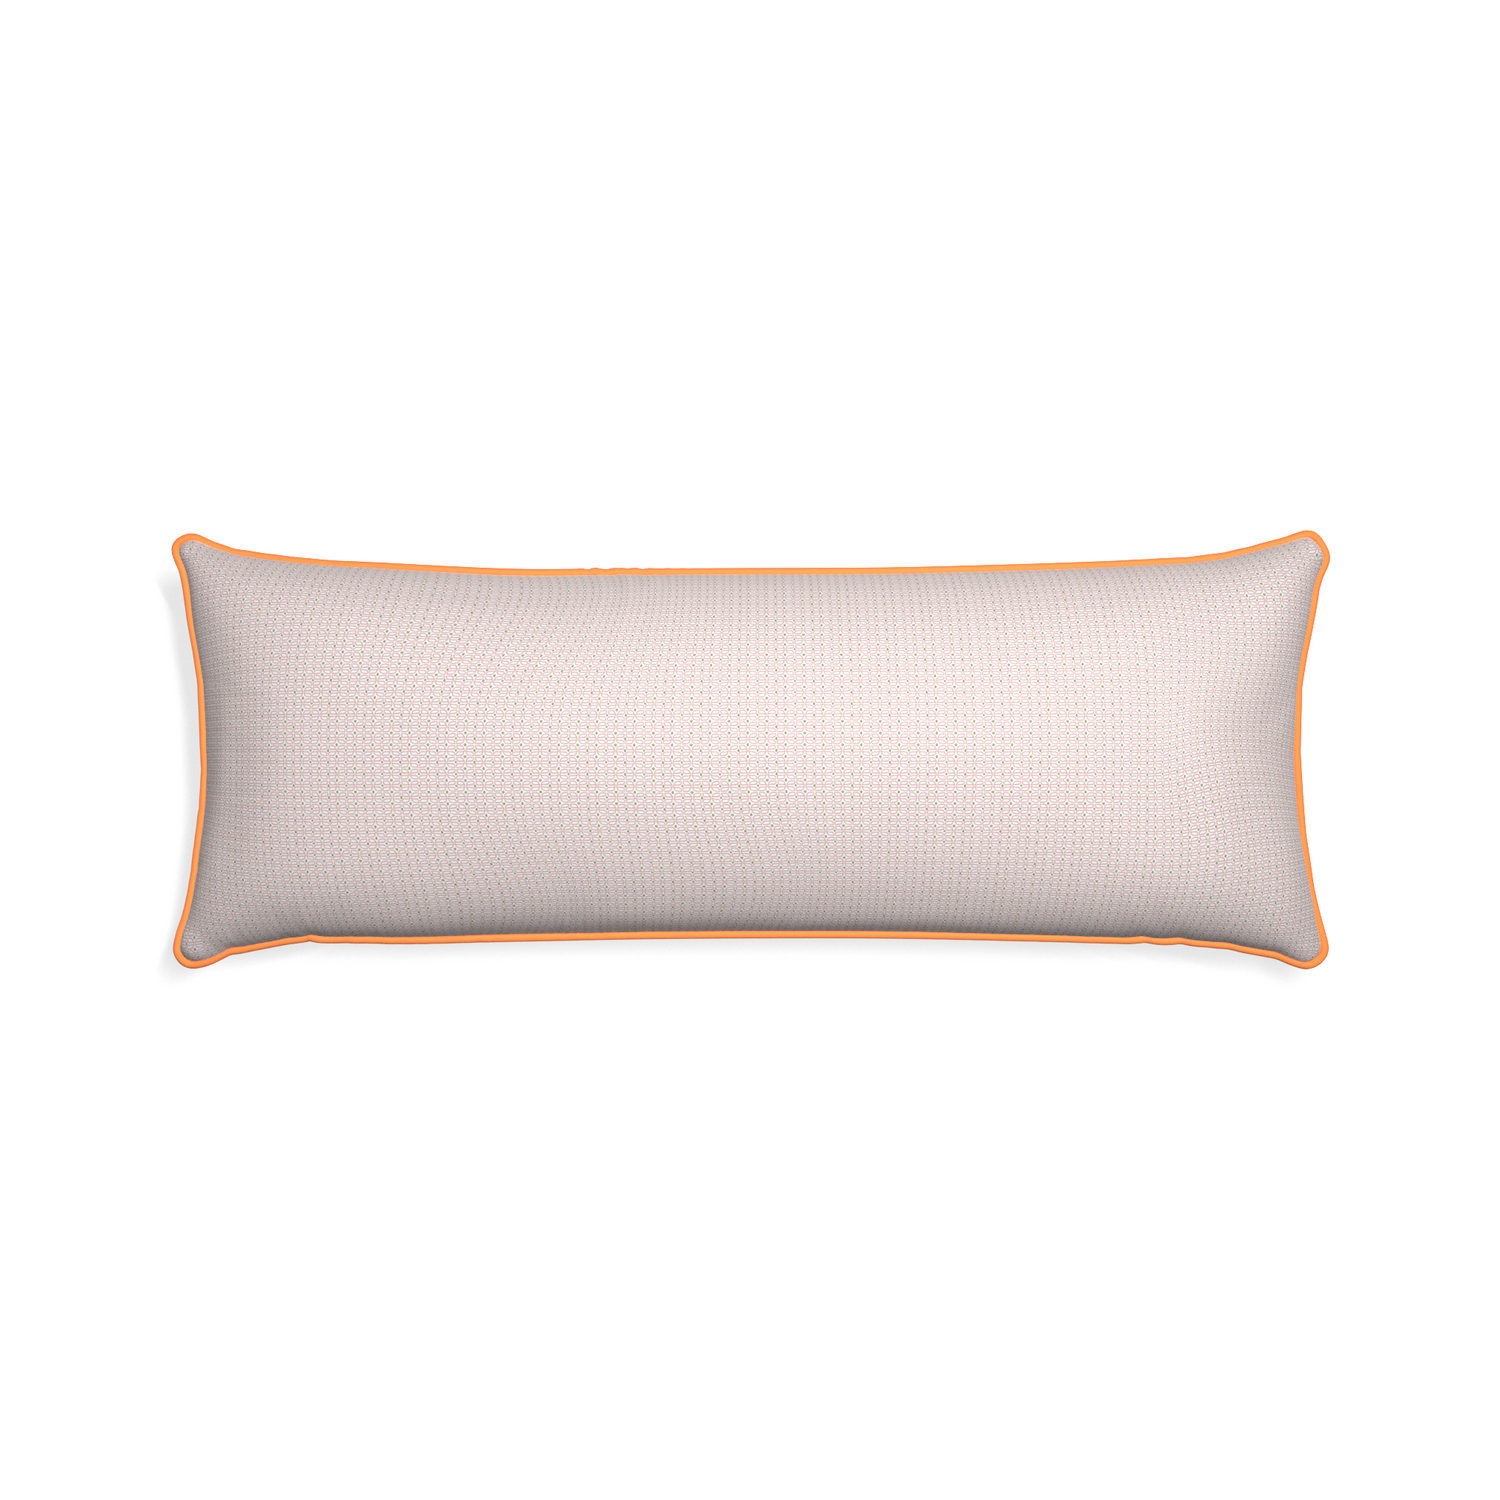 Xl-lumbar loomi pink custom pillow with clementine piping on white background